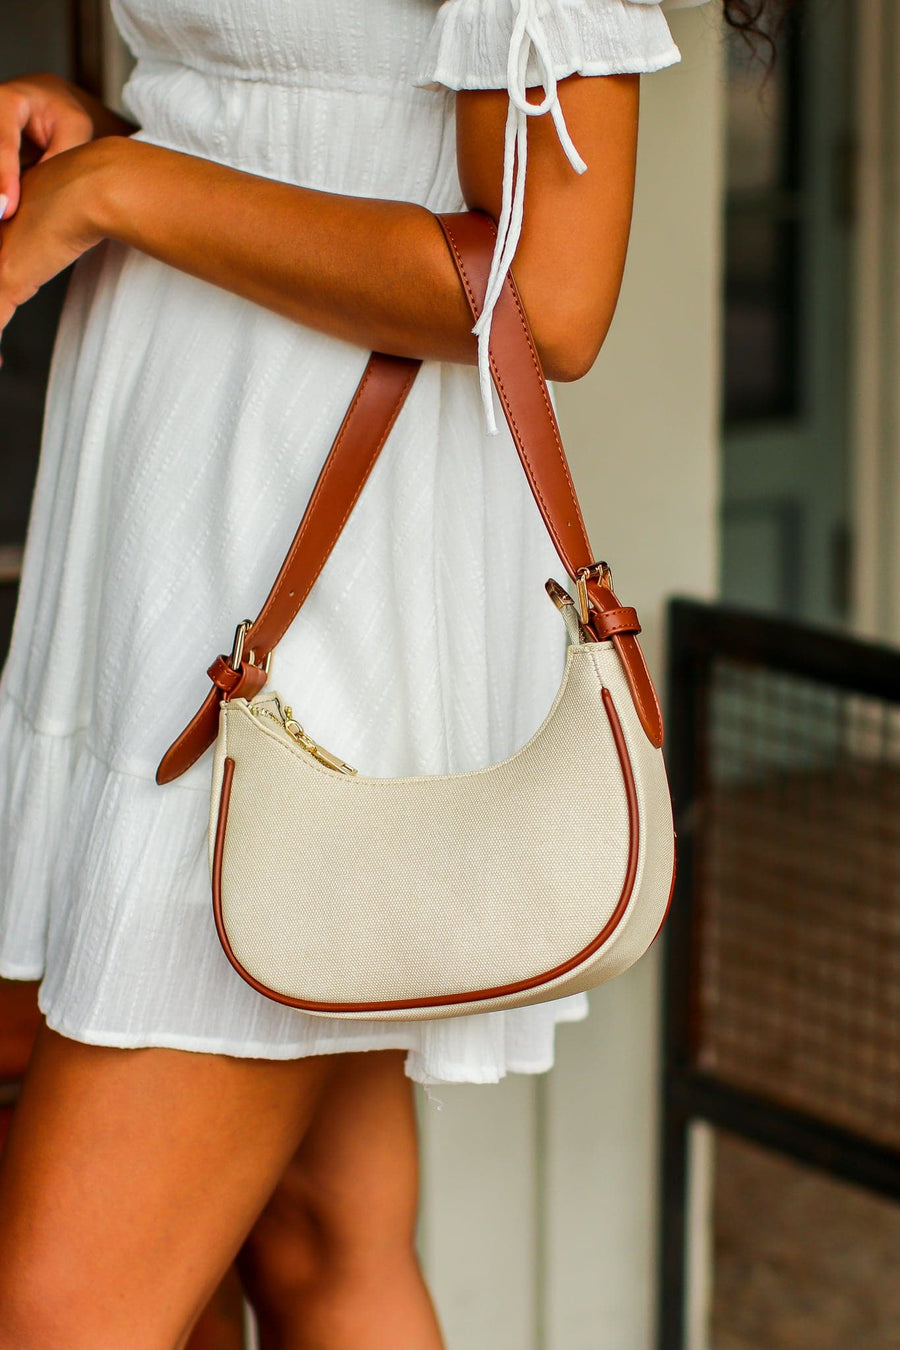 Ivory Total Treat Canvas Faux Leather Handbag - FINAL SALE - Madison and Mallory